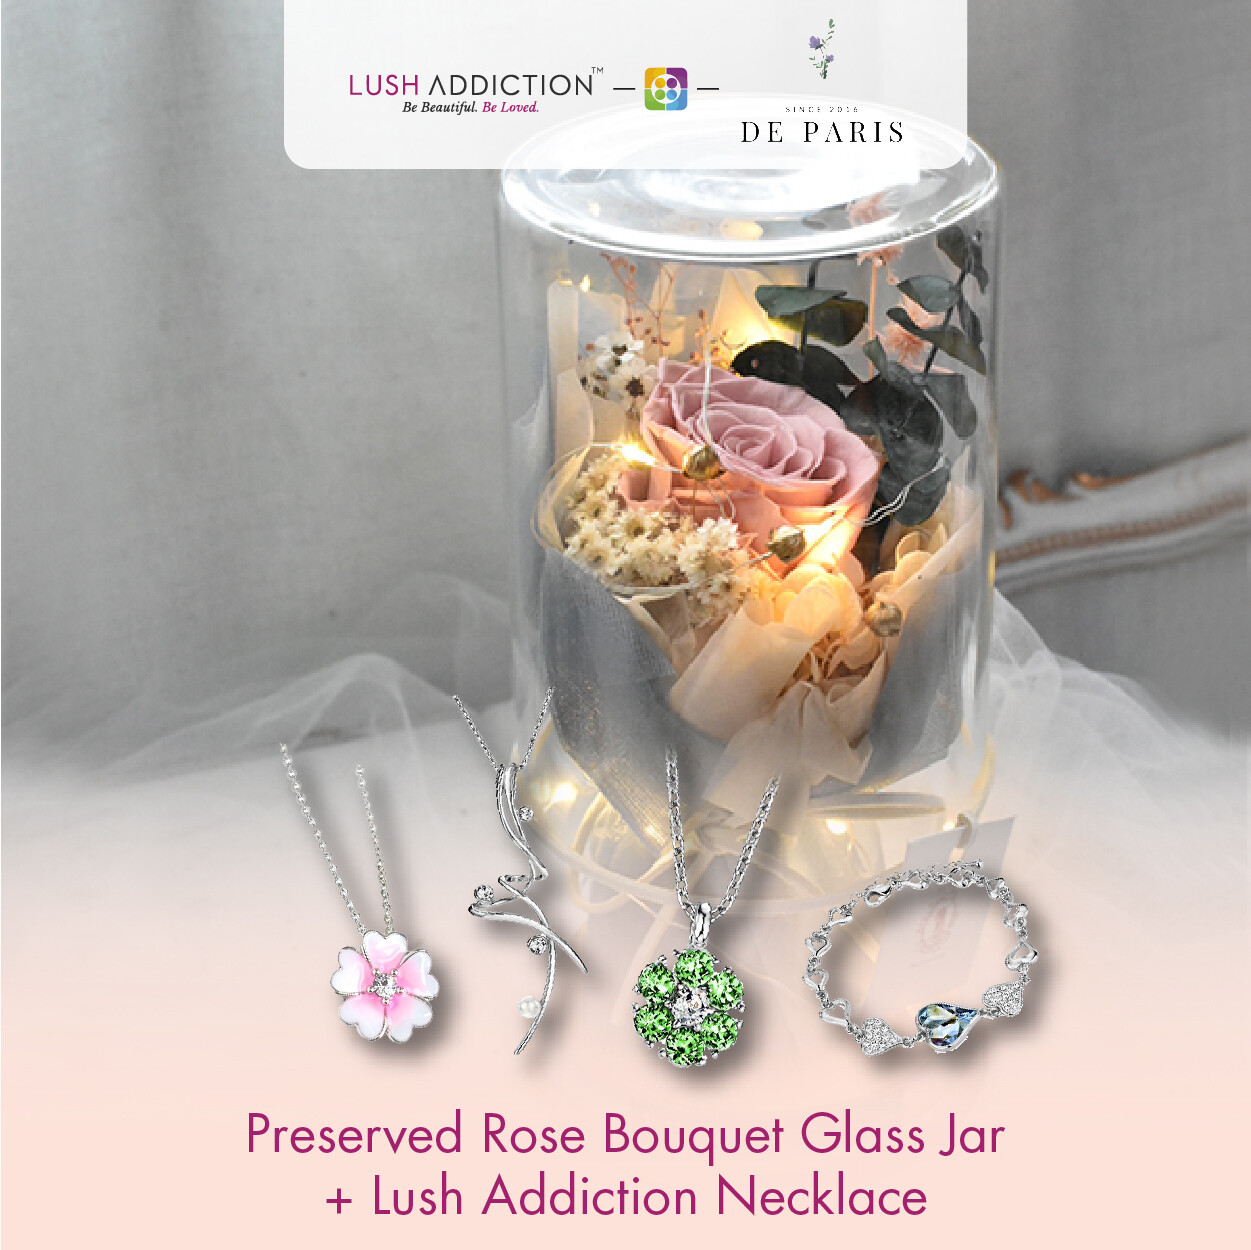 Preserved Rose Bouquet Glass Jar + Lush Addiction Necklace (By: De Paris from Pulau Pinang)